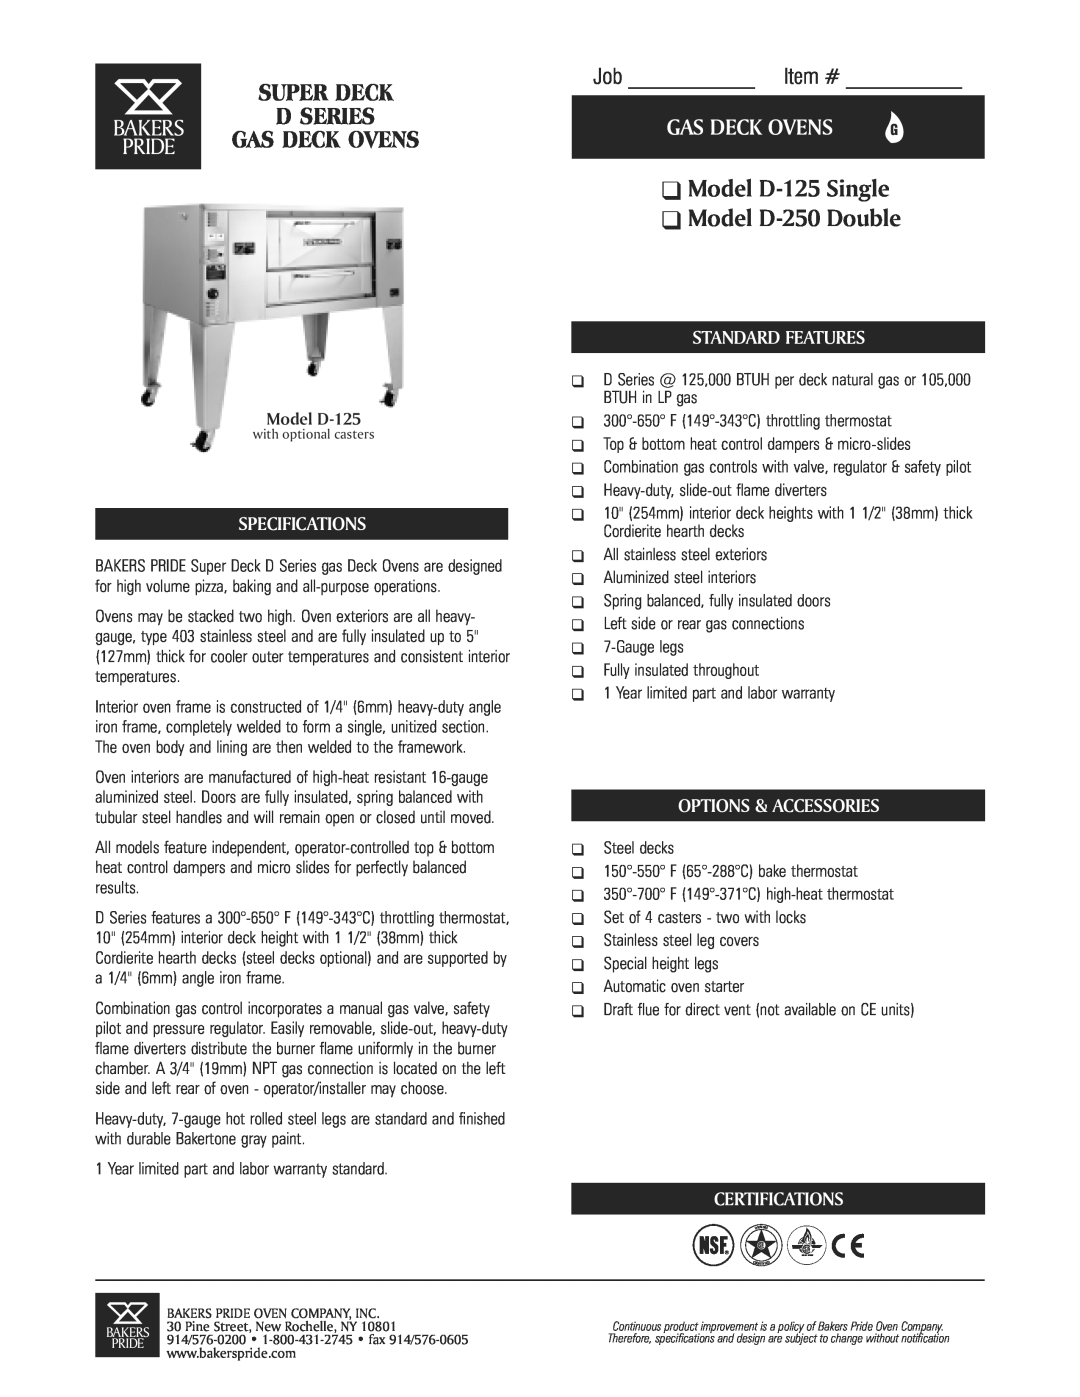 Bakers Pride Oven D-125 manual Parts List, Type of Gas, Gas Deck Oven, Model Number, Serial Number, 0200, 0605, 2745 